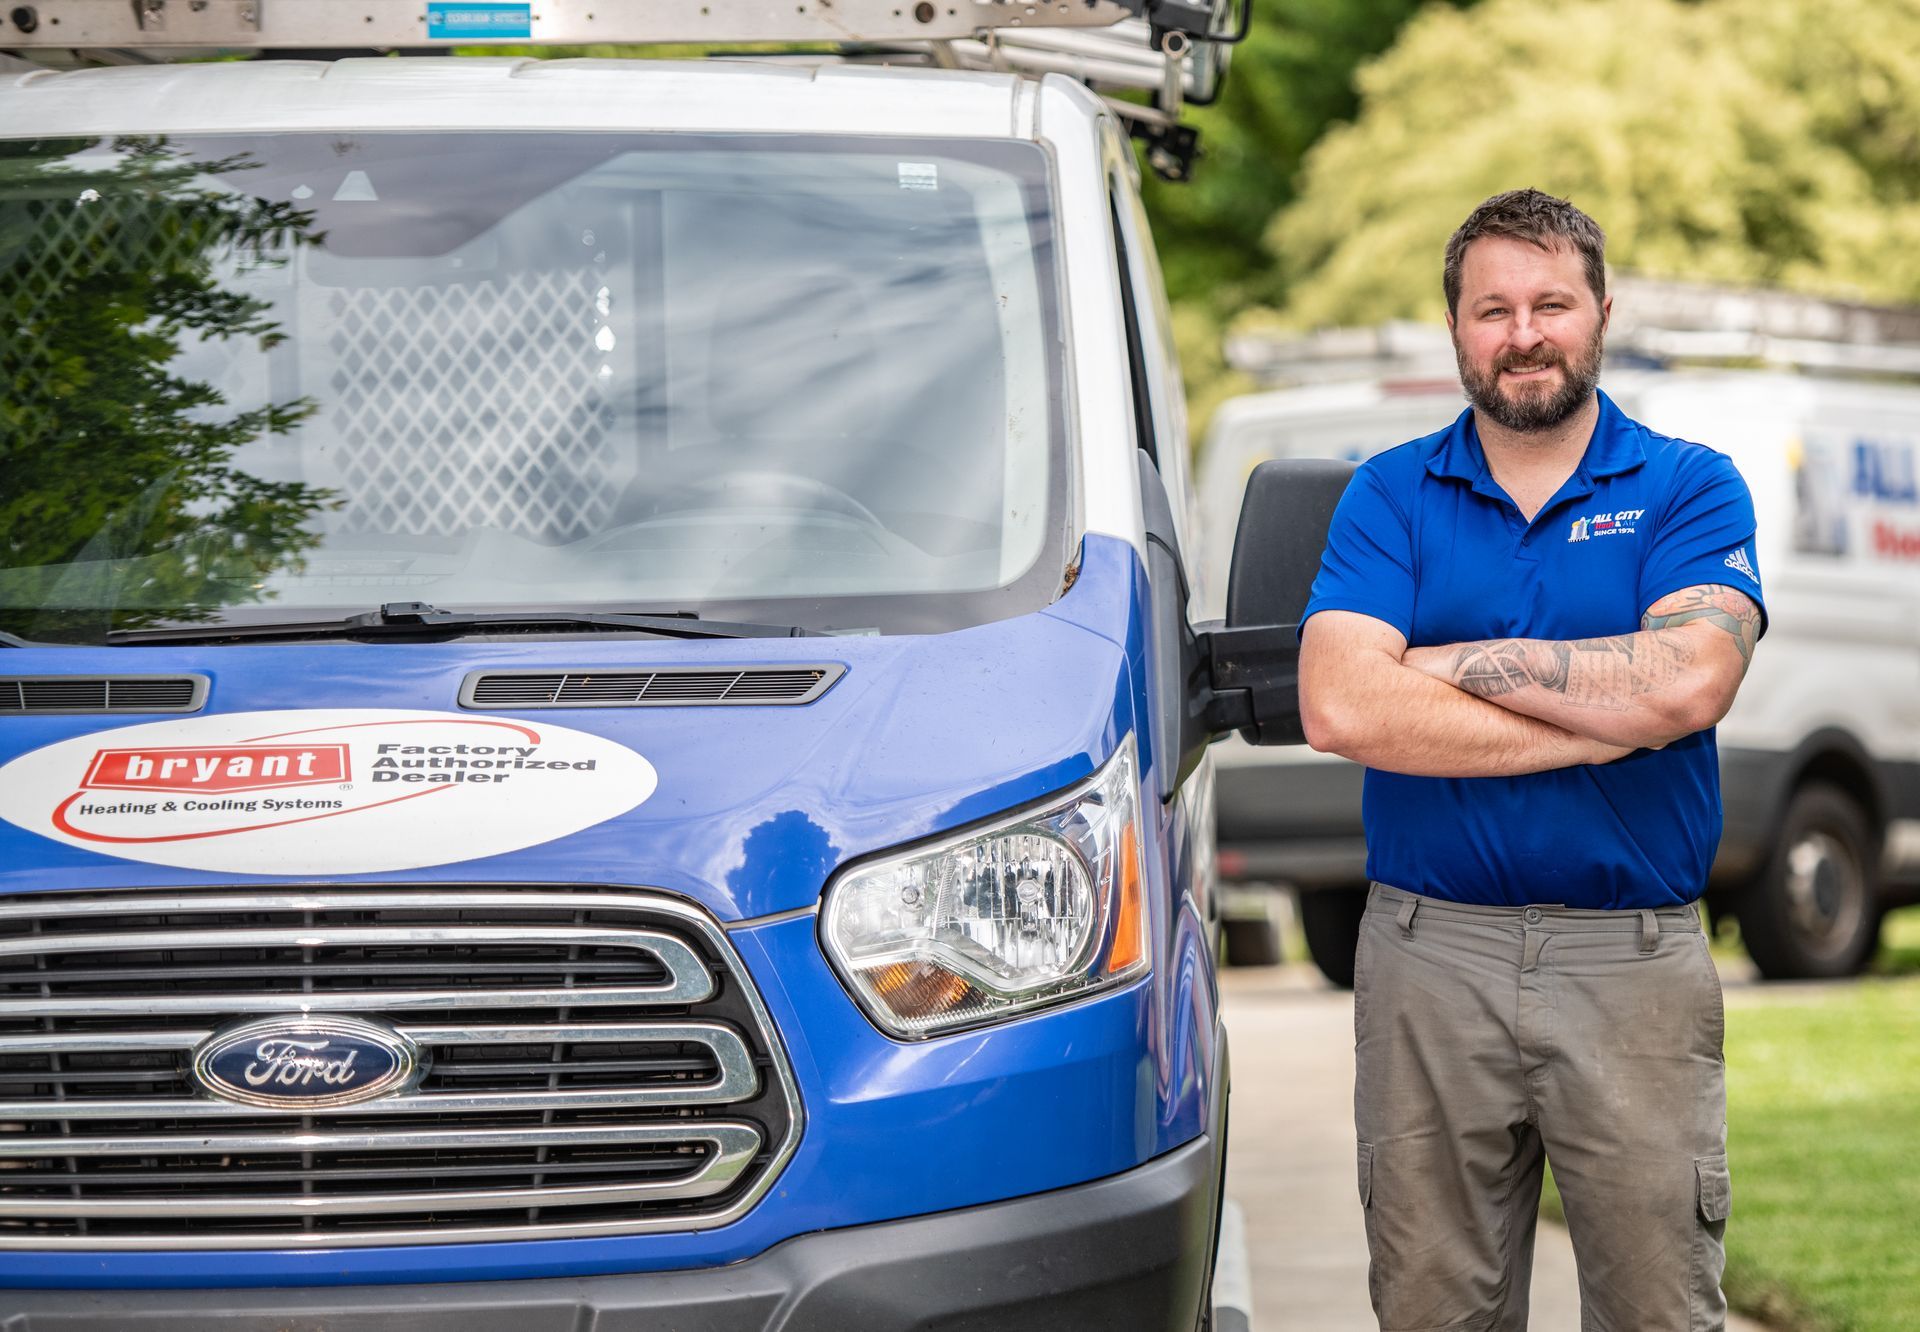 An All City Heat and Air technician is standing in front of an All City Heat and Air van with his arms crossed.